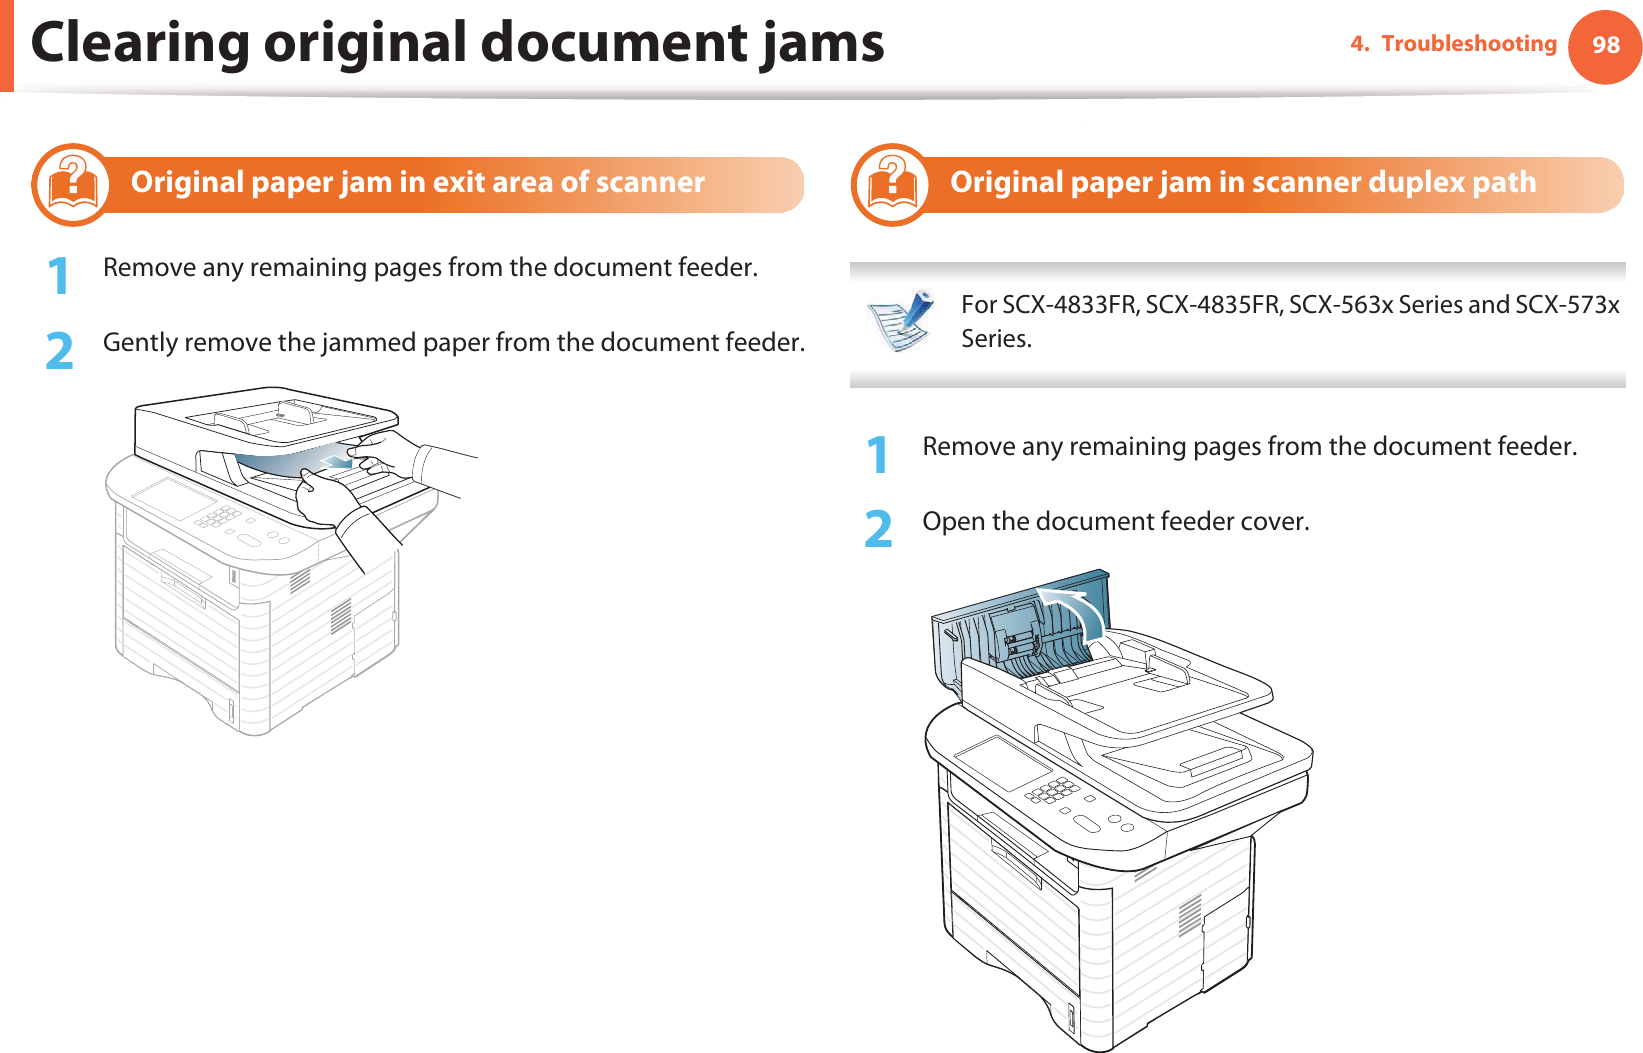 Clearing original document jams 984. Troubleshooting3 Original paper jam in exit area of scanner1Remove any remaining pages from the document feeder.2  Gently remove the jammed paper from the document feeder.4 Original paper jam in scanner duplex path For SCX-4833FR, SCX-4835FR, SCX-563x Series and SCX-573x Series. 1Remove any remaining pages from the document feeder.2  Open the document feeder cover.